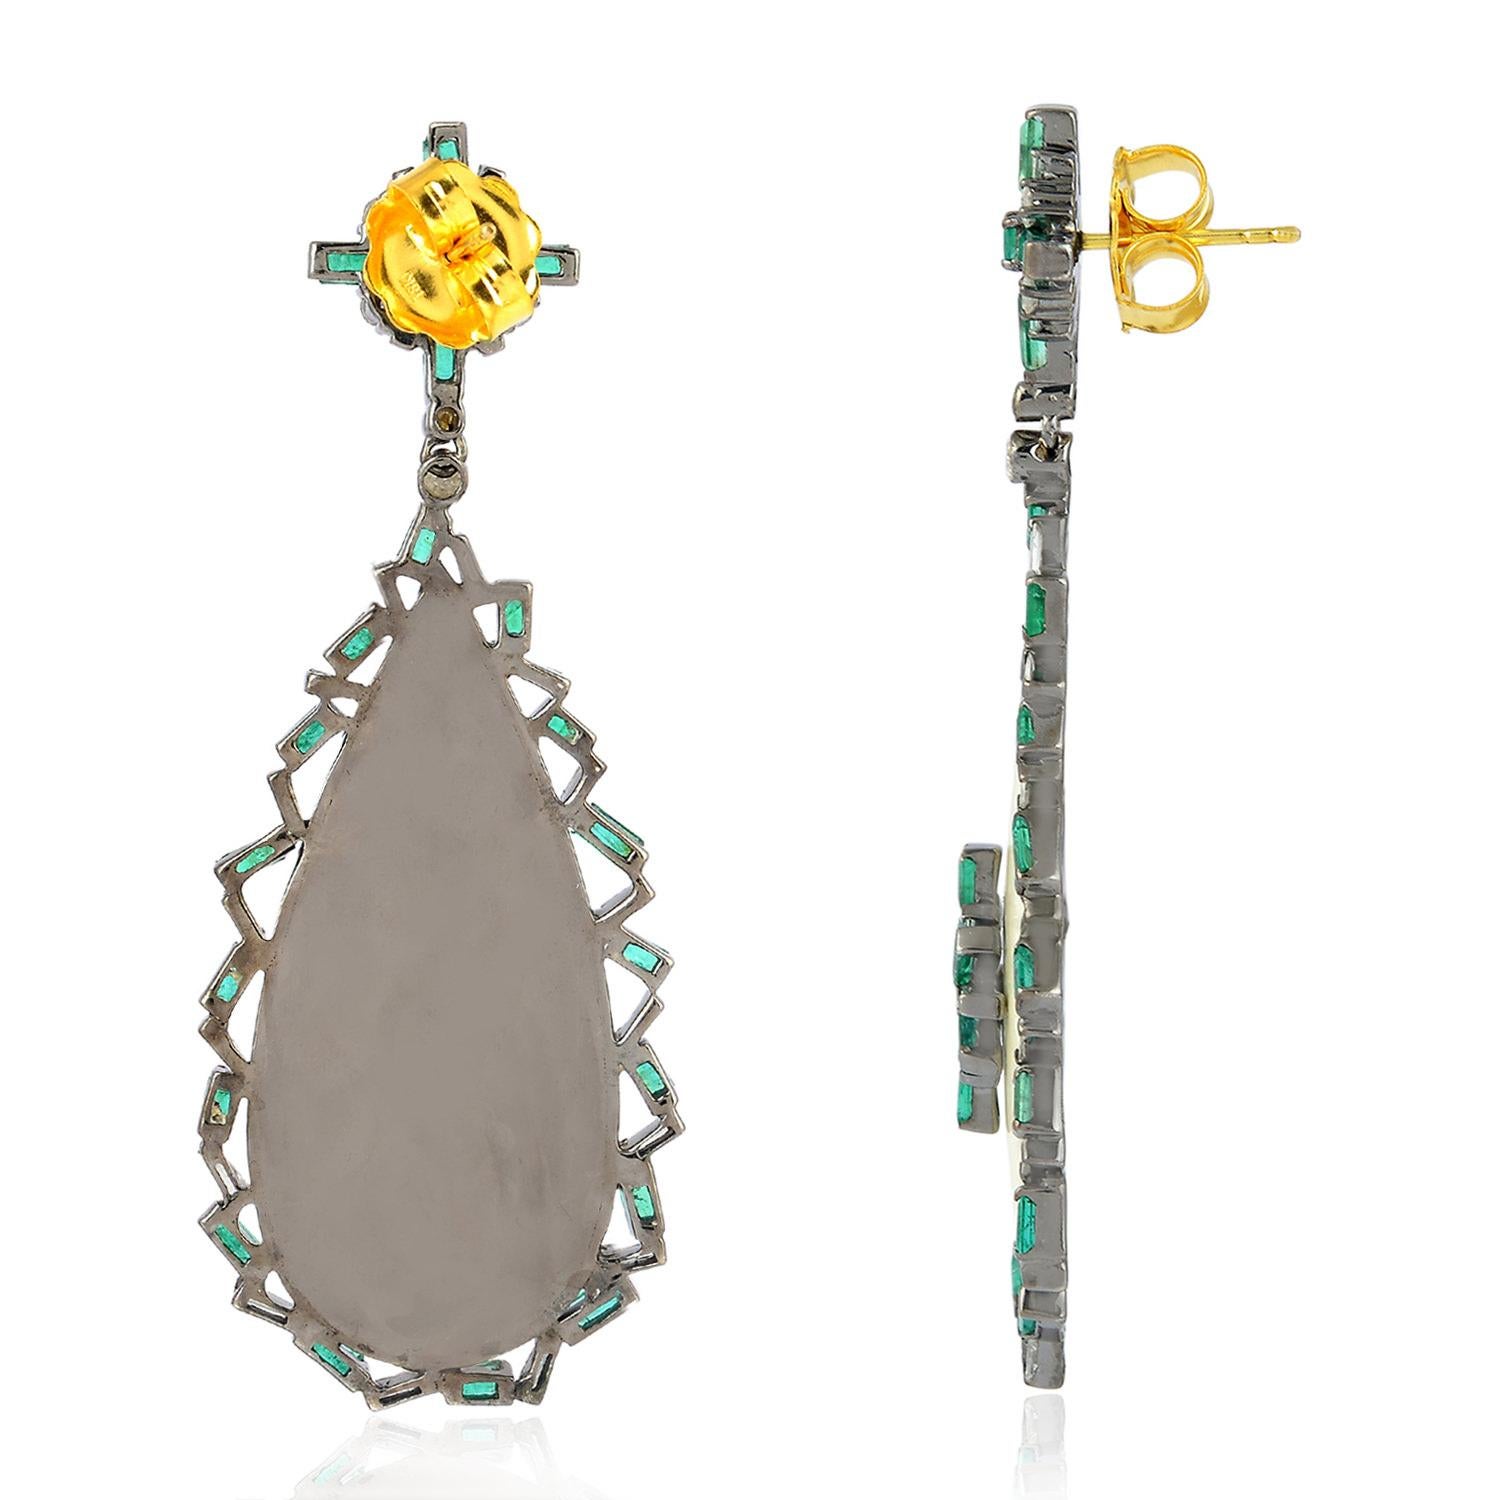 These beautiful enamel earrings are handcrafted in 18-karat gold & sterling silver. It is set in baguette cut 3.92 carats emerald and 1.37 carats of  diamonds.

FOLLOW  MEGHNA JEWELS storefront to view the latest collection & exclusive pieces. 